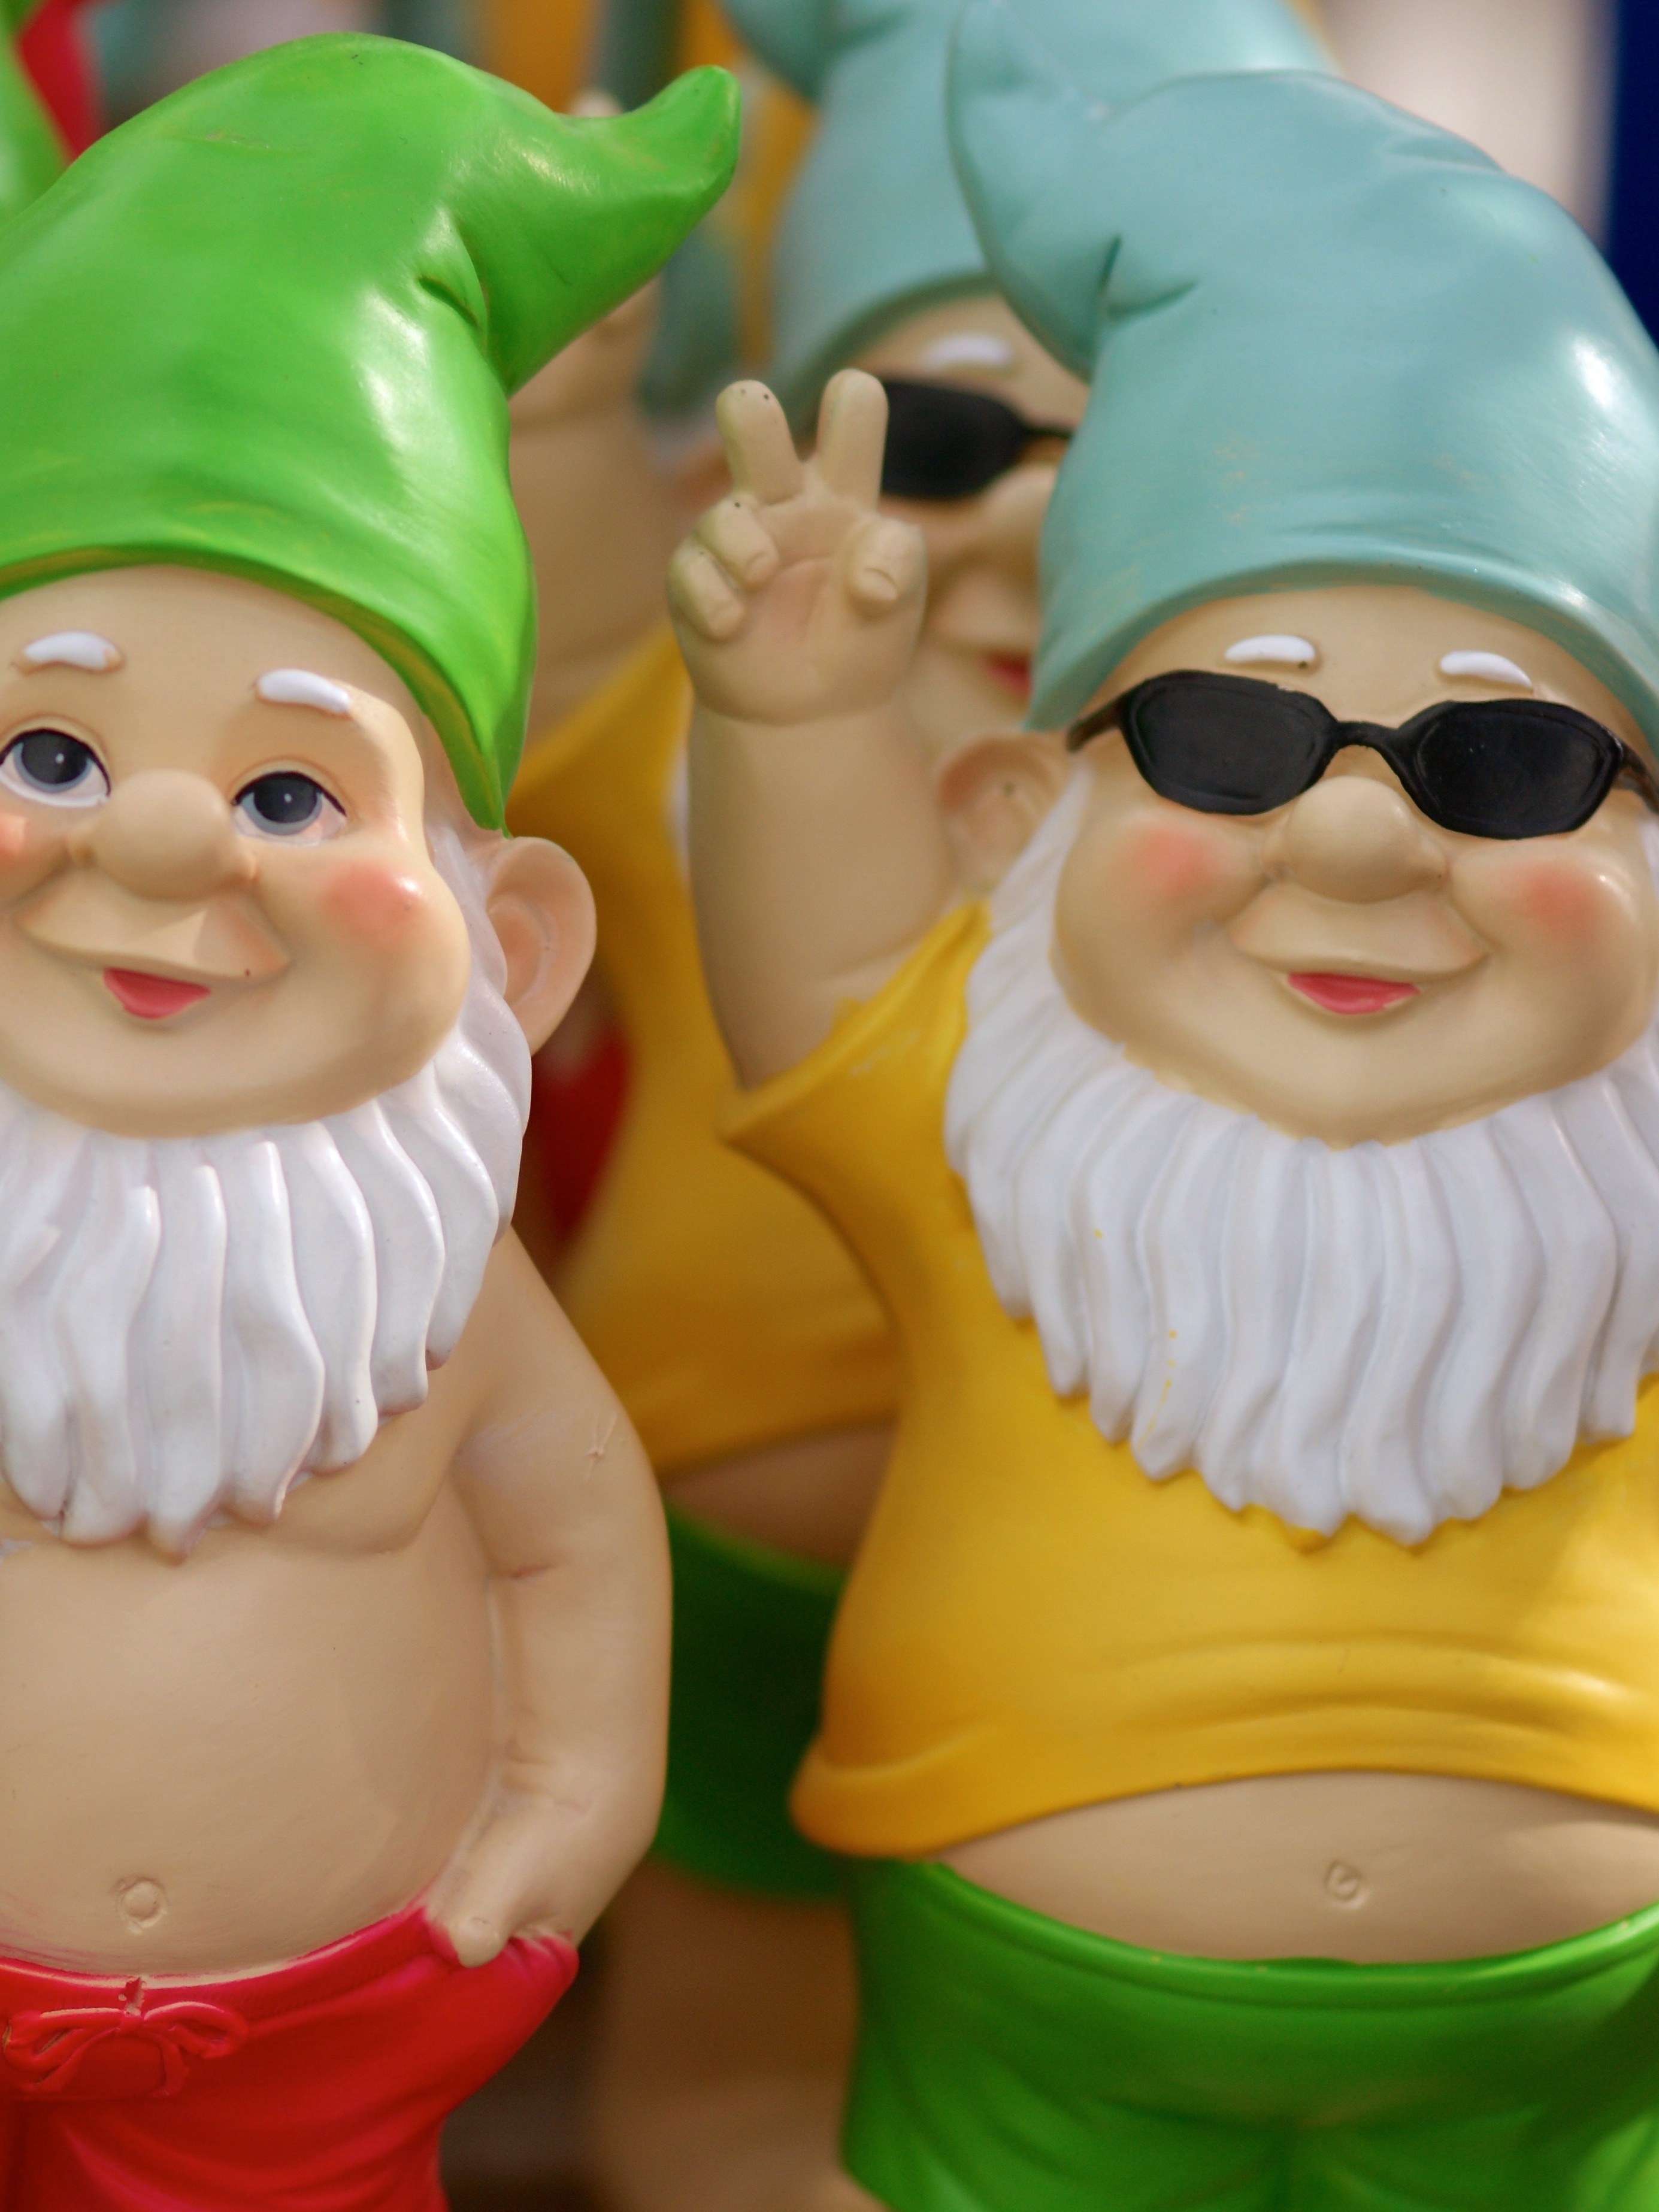 Garden Gnome, Colorful, Funny, Summer, childhood, child